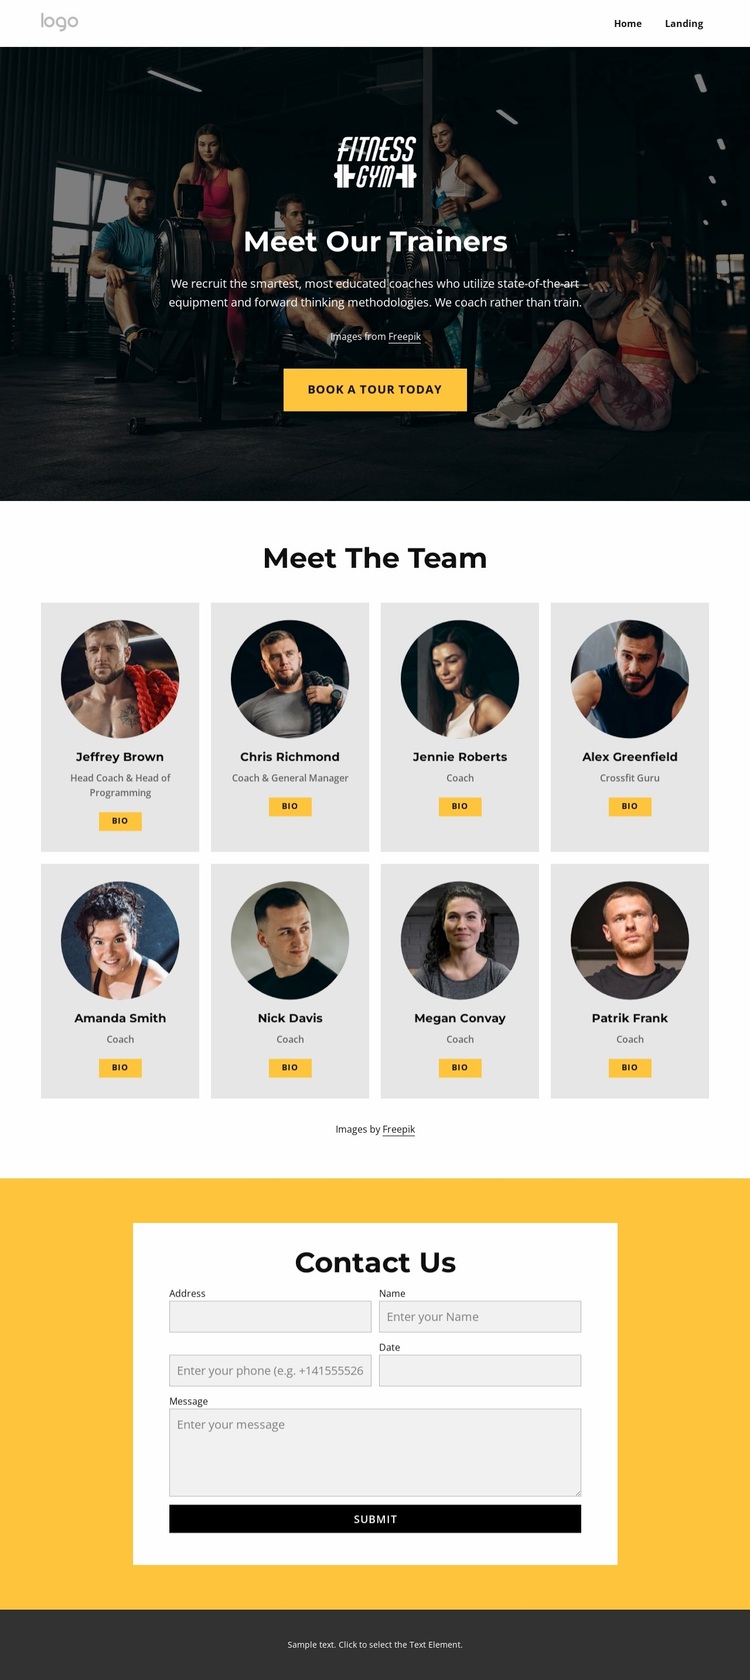 Meet our trainers Website Design